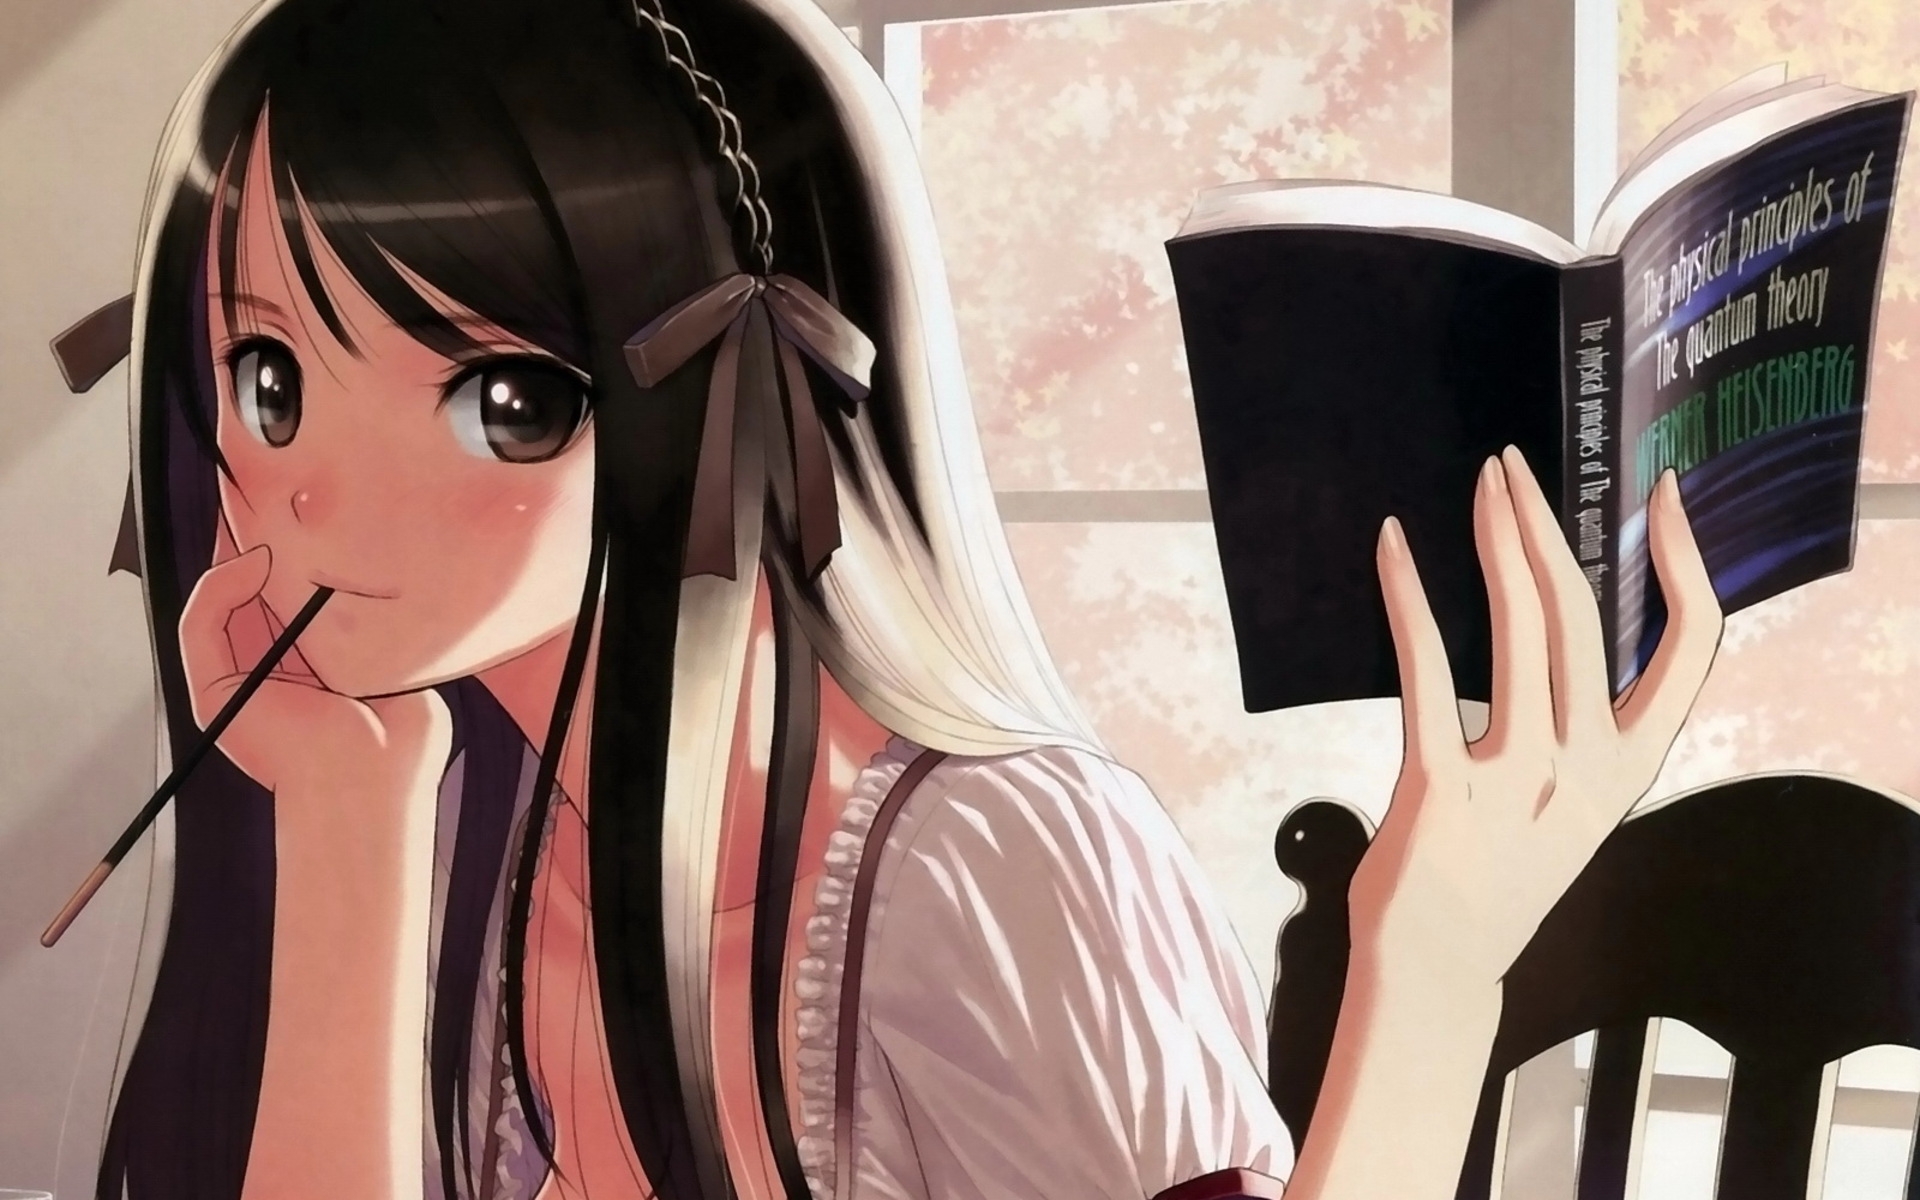 Download Anime Girl Studying Wallpaper 1920x1200 | Full HD Wallpapers